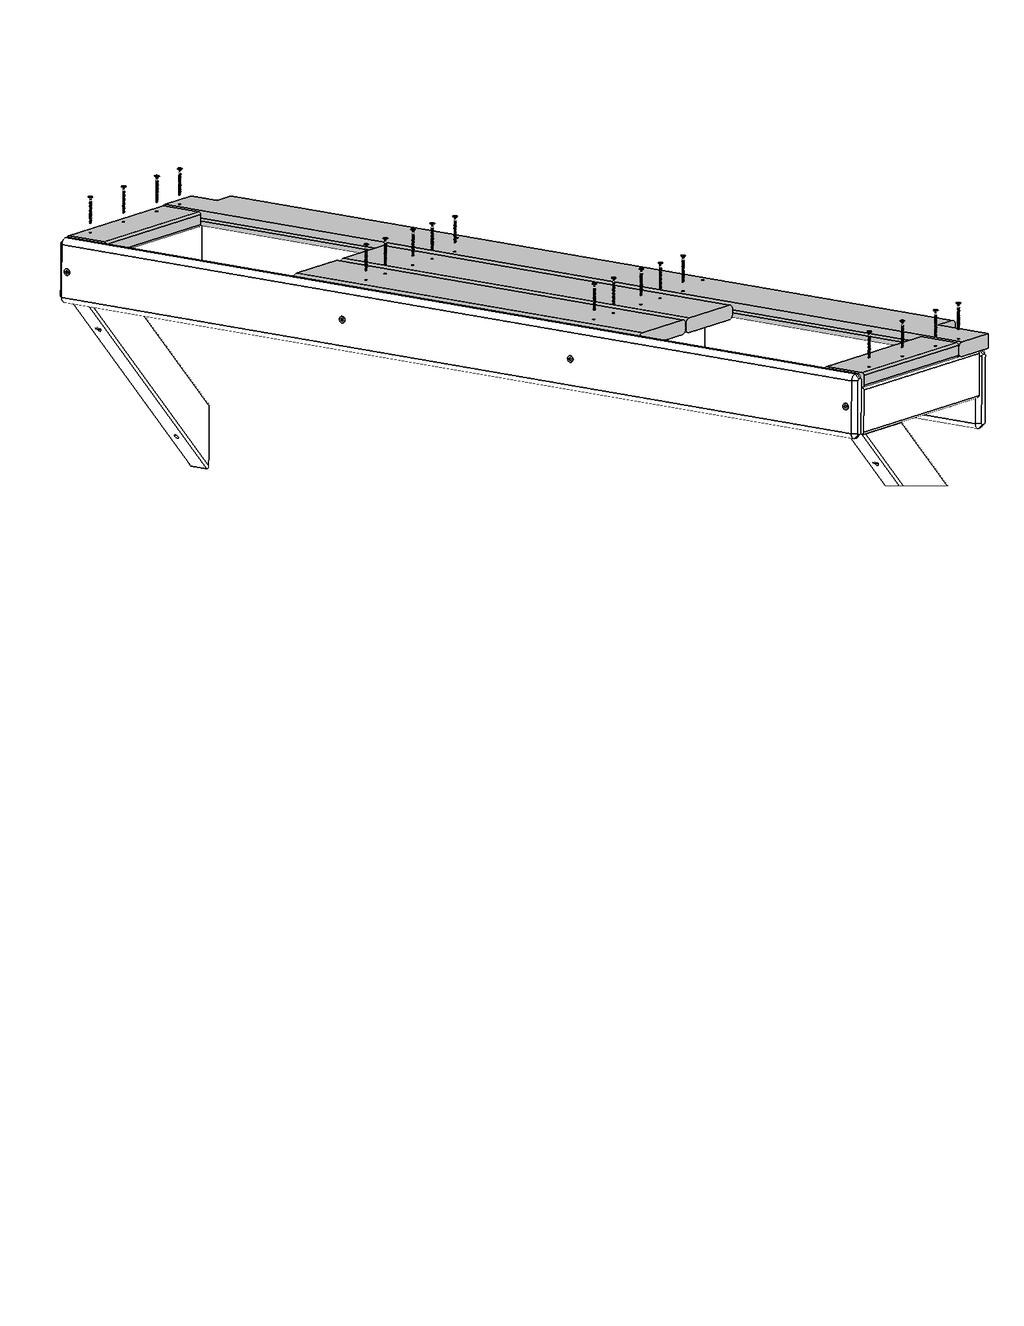 Step 21: Counter Assembly Part 5 F: Tight to (2687) Counter Back attach (2685) Counter Top to each (5736) Counter Joist with 4 (TS) #6 x 30 mm Trim Screws. (fig. 21.7) G: Tight to (2685) Counter Top and flush to the outside edges of the outer (5736) Counter Joists attach 1 (5536) Counter Side per joist with 3 (TS) #6 x 30 mm Trim Screws per board.